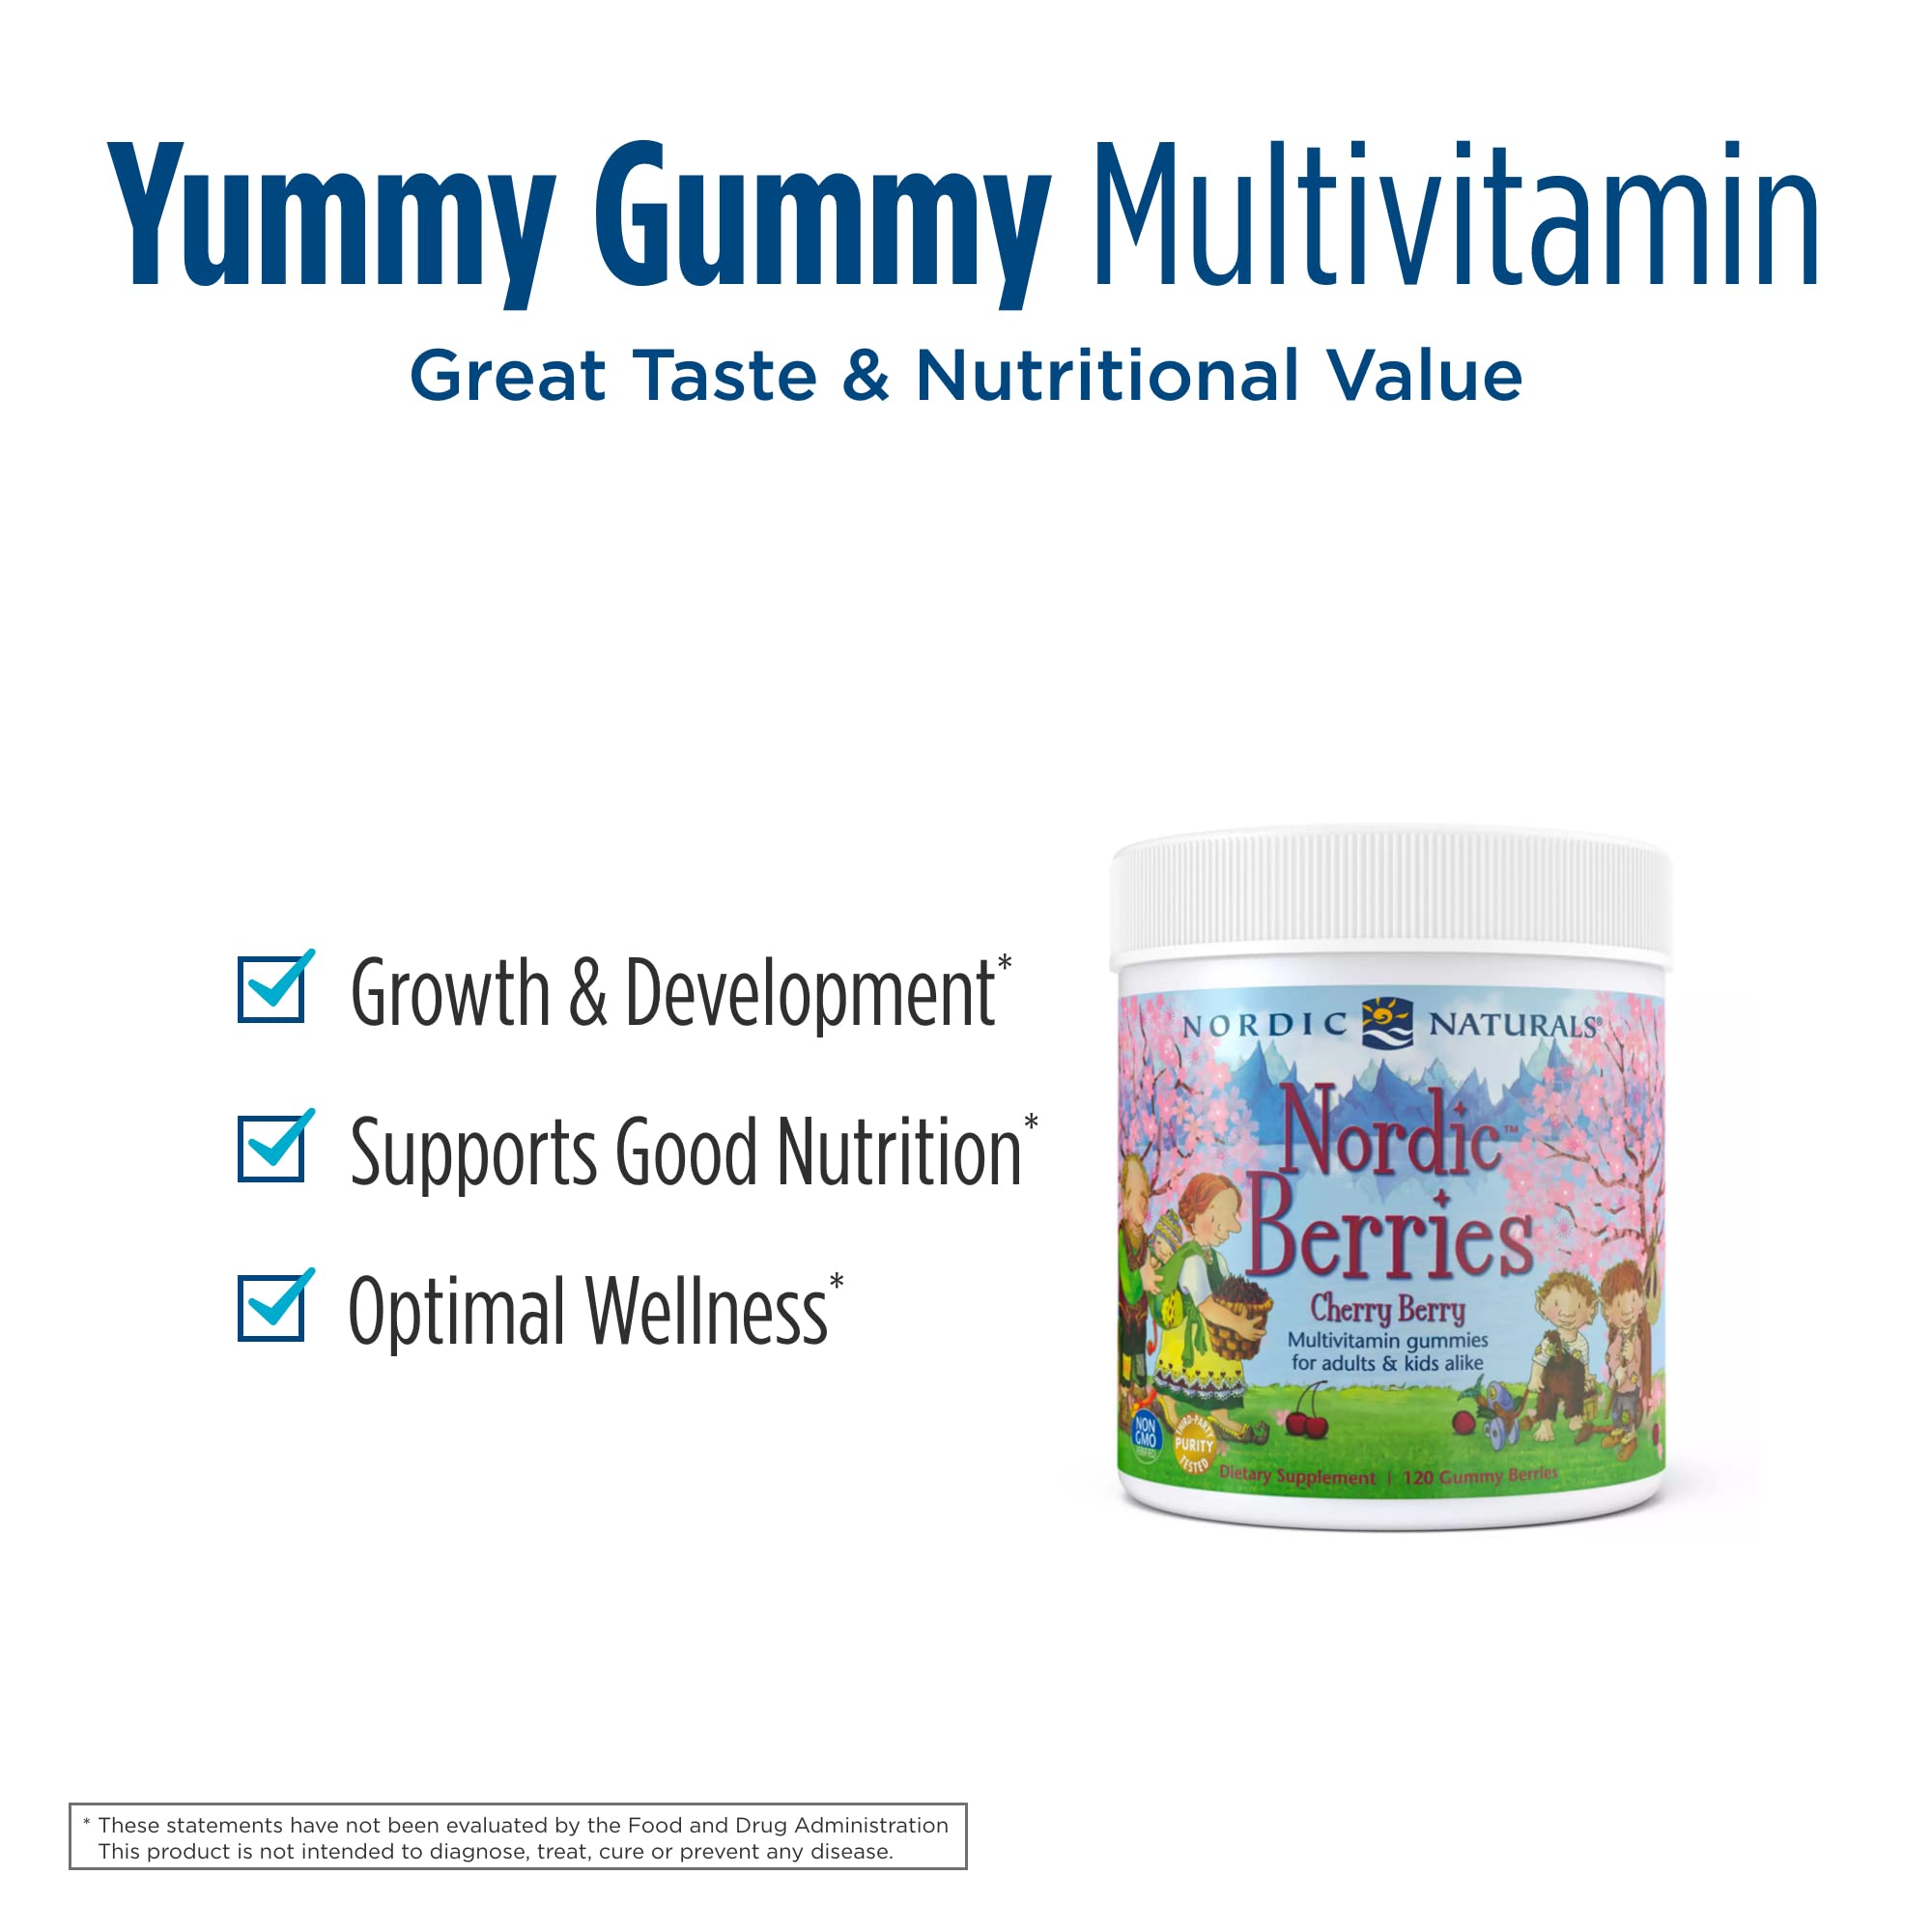 Nordic Naturals Cherry Multivitamin Gummy - Chewable Vitamin For Children And Adults Provides Essential Vitamins And Nutrients For Immune System, Bone Health, Development & Overall Health, 120 Count